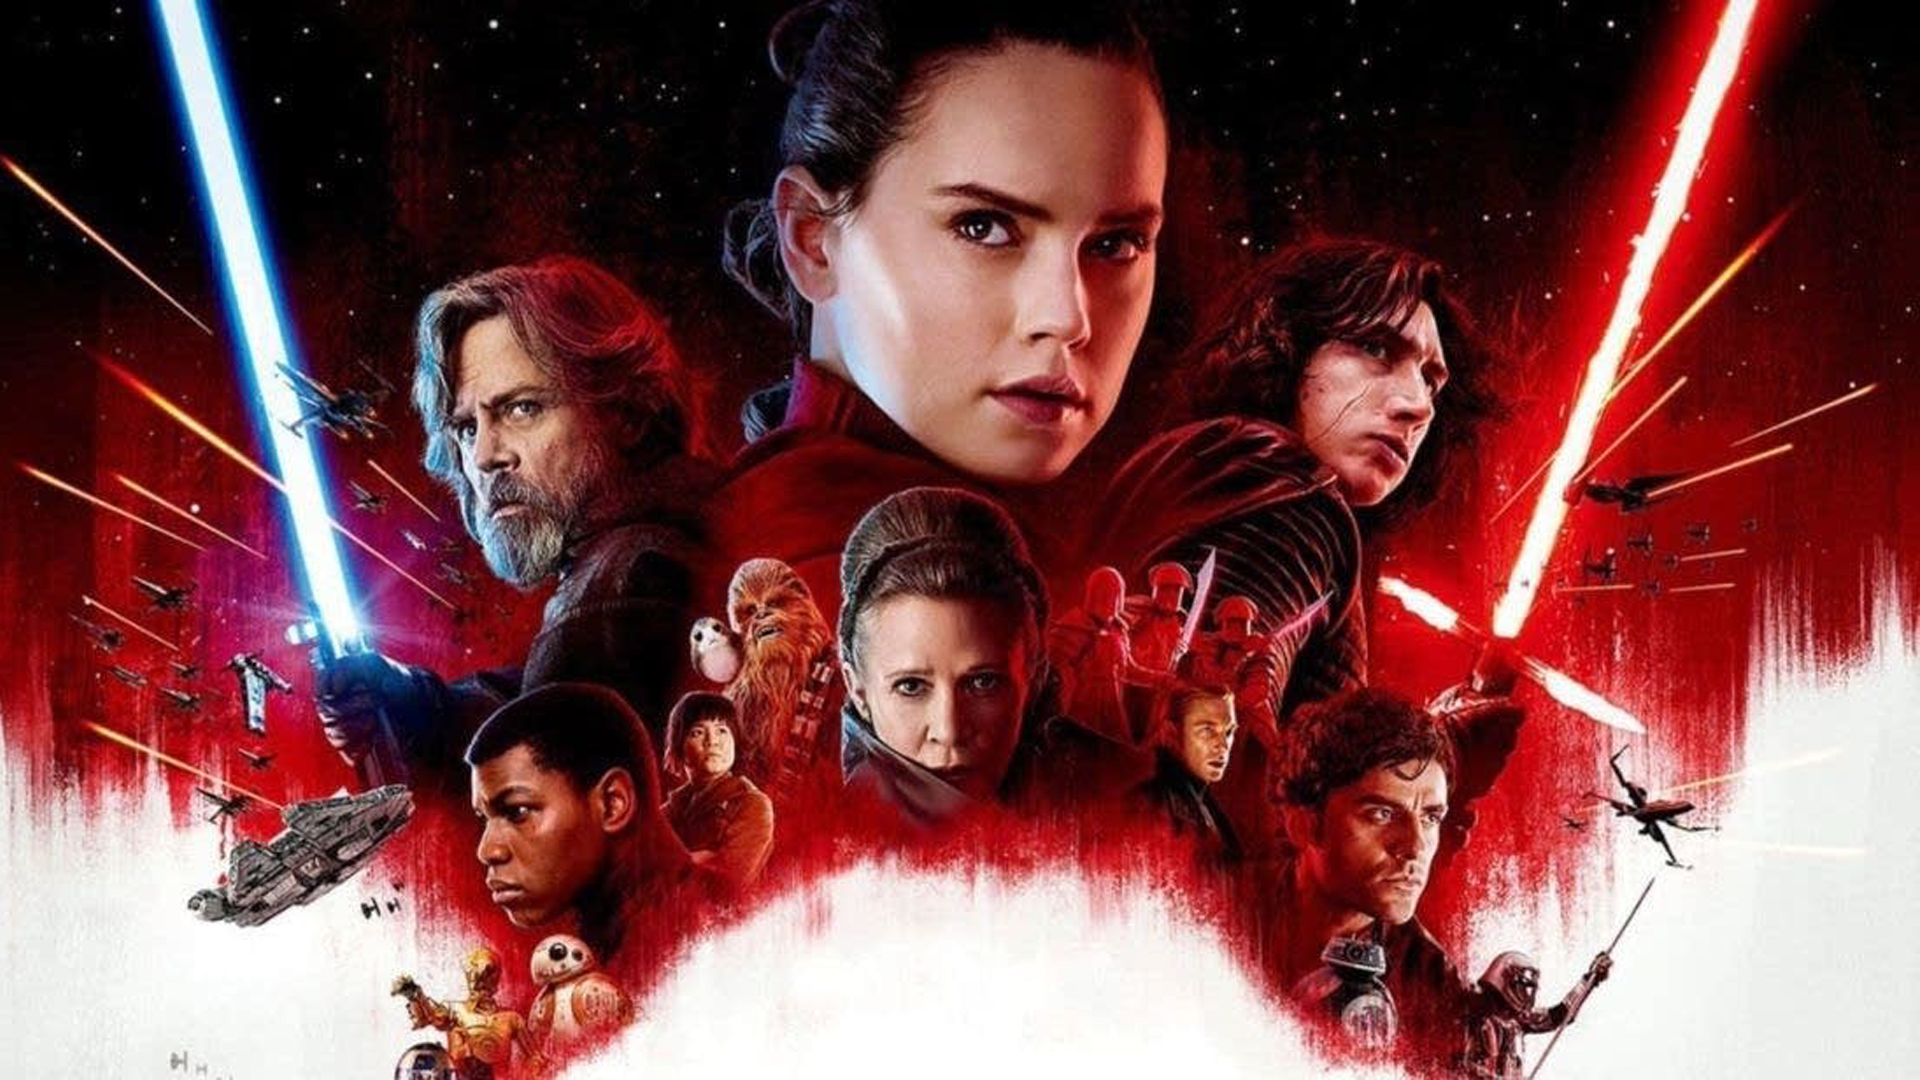 The Last Jedi Director in Talks for New Star Wars Movies - GameRevolution